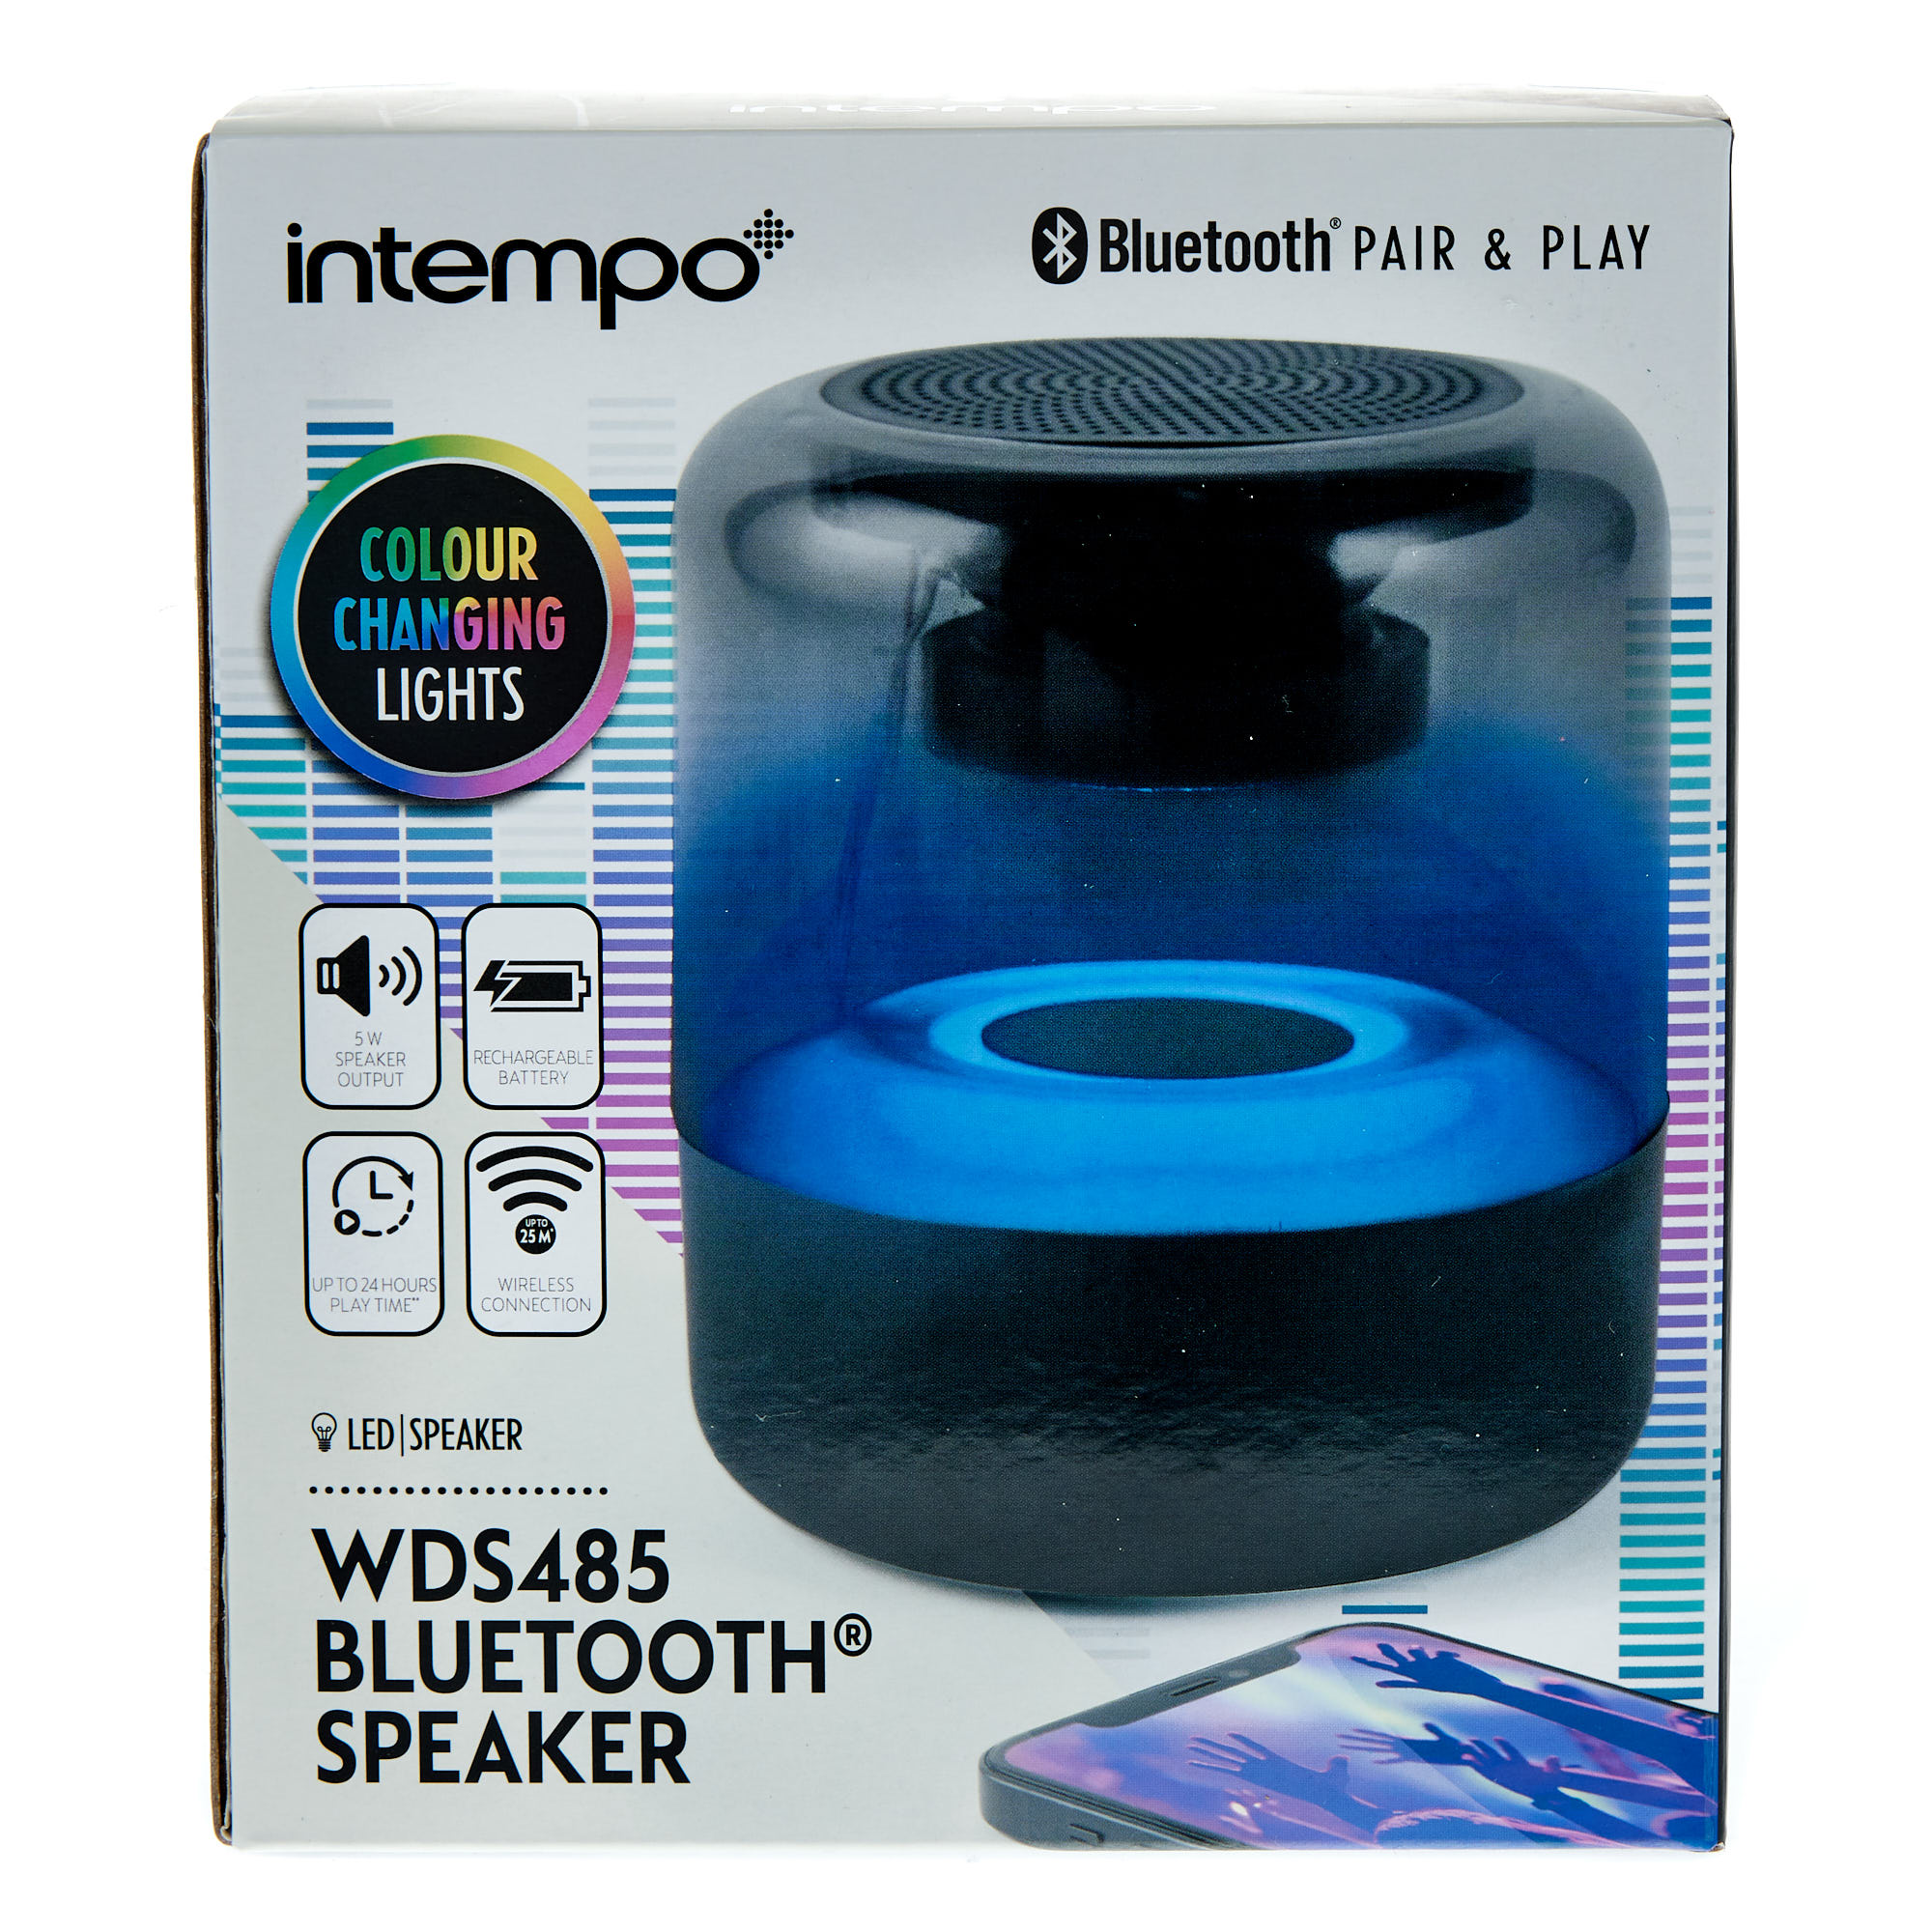 Intempo WDS485 Bluetooth Speaker With LED Colour Changing Lights